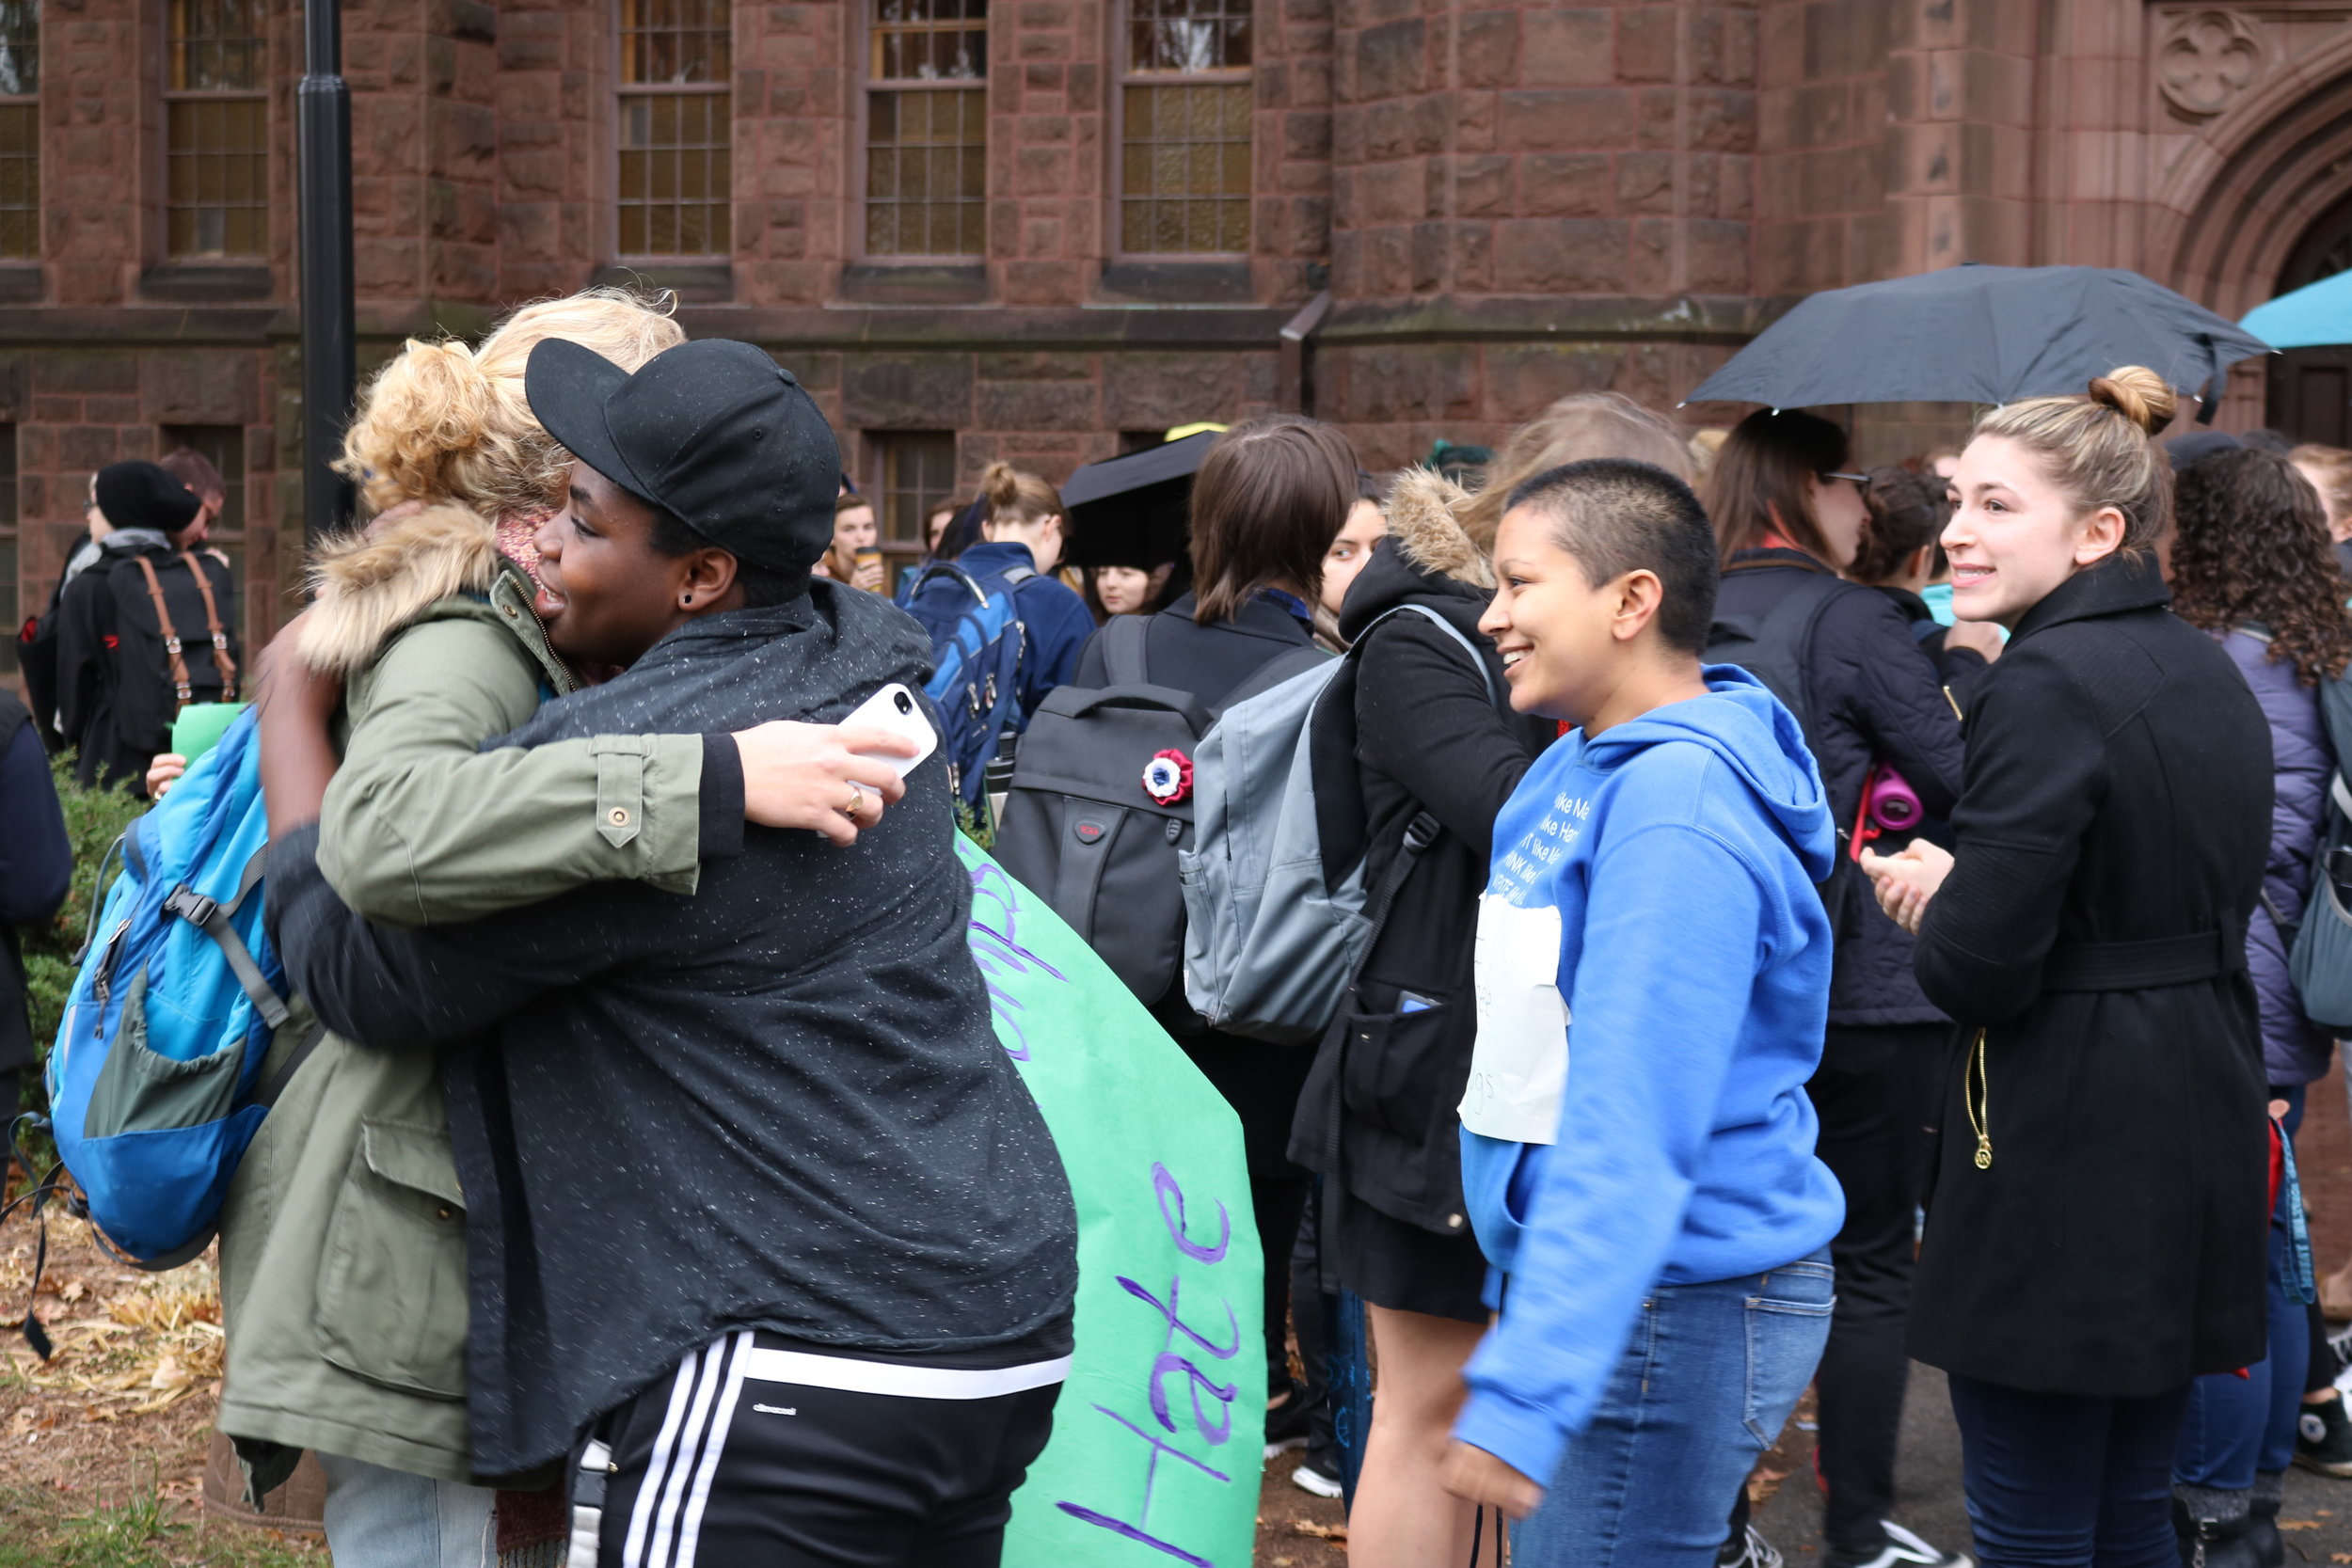  Photos by Dana Pan '20 Students, faculty and staff gathered in a circle outside Williston Miles-Smith Library Wednesday afternoon in reaction to the results of the 2016 presidential election, during which Donald Trump was announced as president-elec